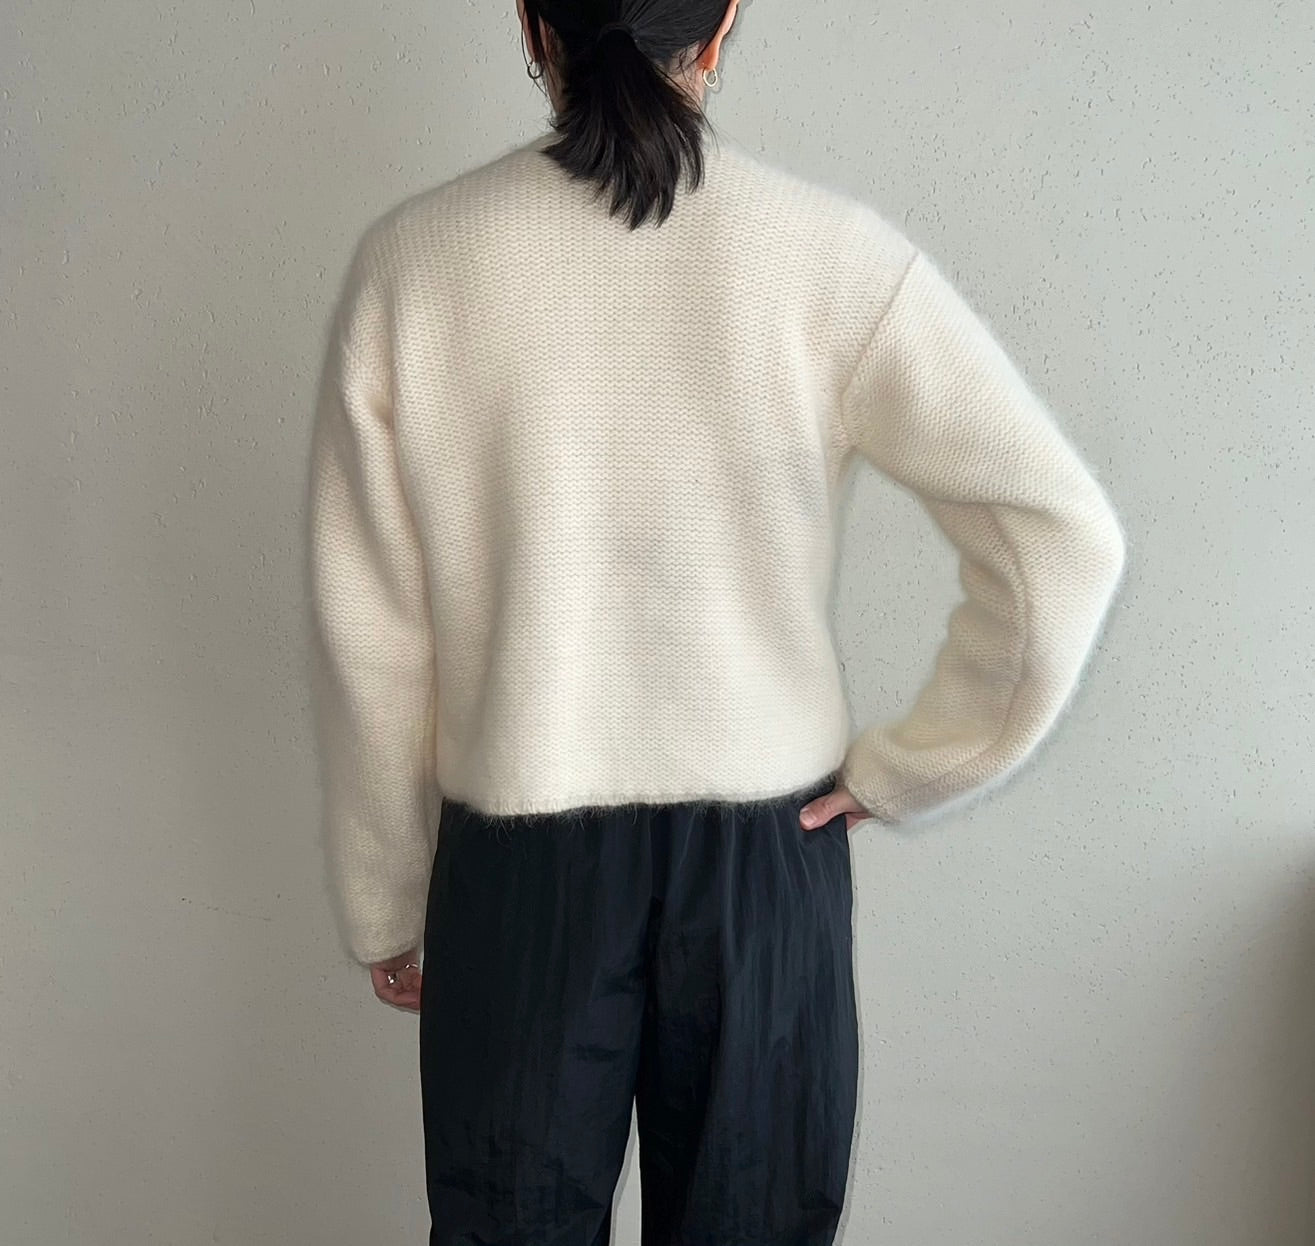 90s Angora Mohair Knit Cardigan Made in Spain